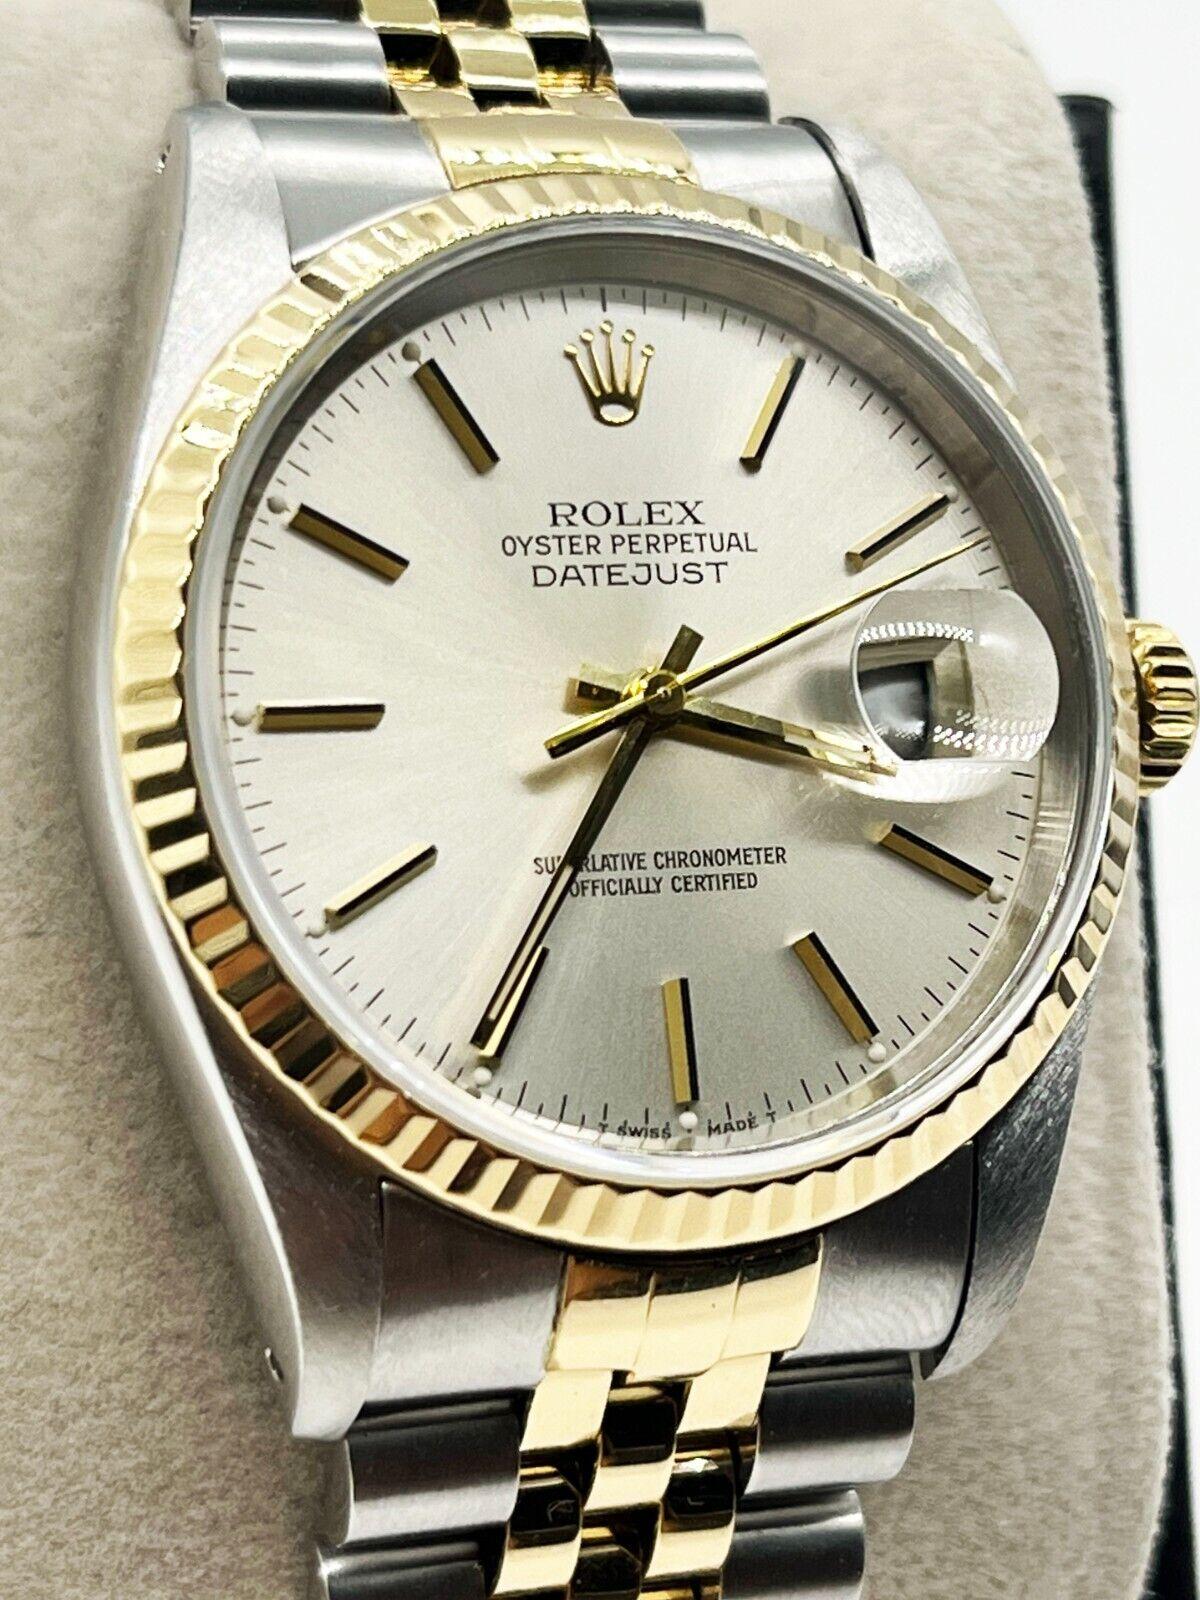 Style Number: 16233
Serial: L538***
Year: 1989
Model: Datejust 
Case Material: Stainless Steel 
Band: 18K Yellow Gold & Stainless Steel 
Bezel: 18K Yellow Gold 
Dial: Silver
Face: Sapphire Crystal 
Case Size: 36mm 

Includes: 

-Elegant Watch